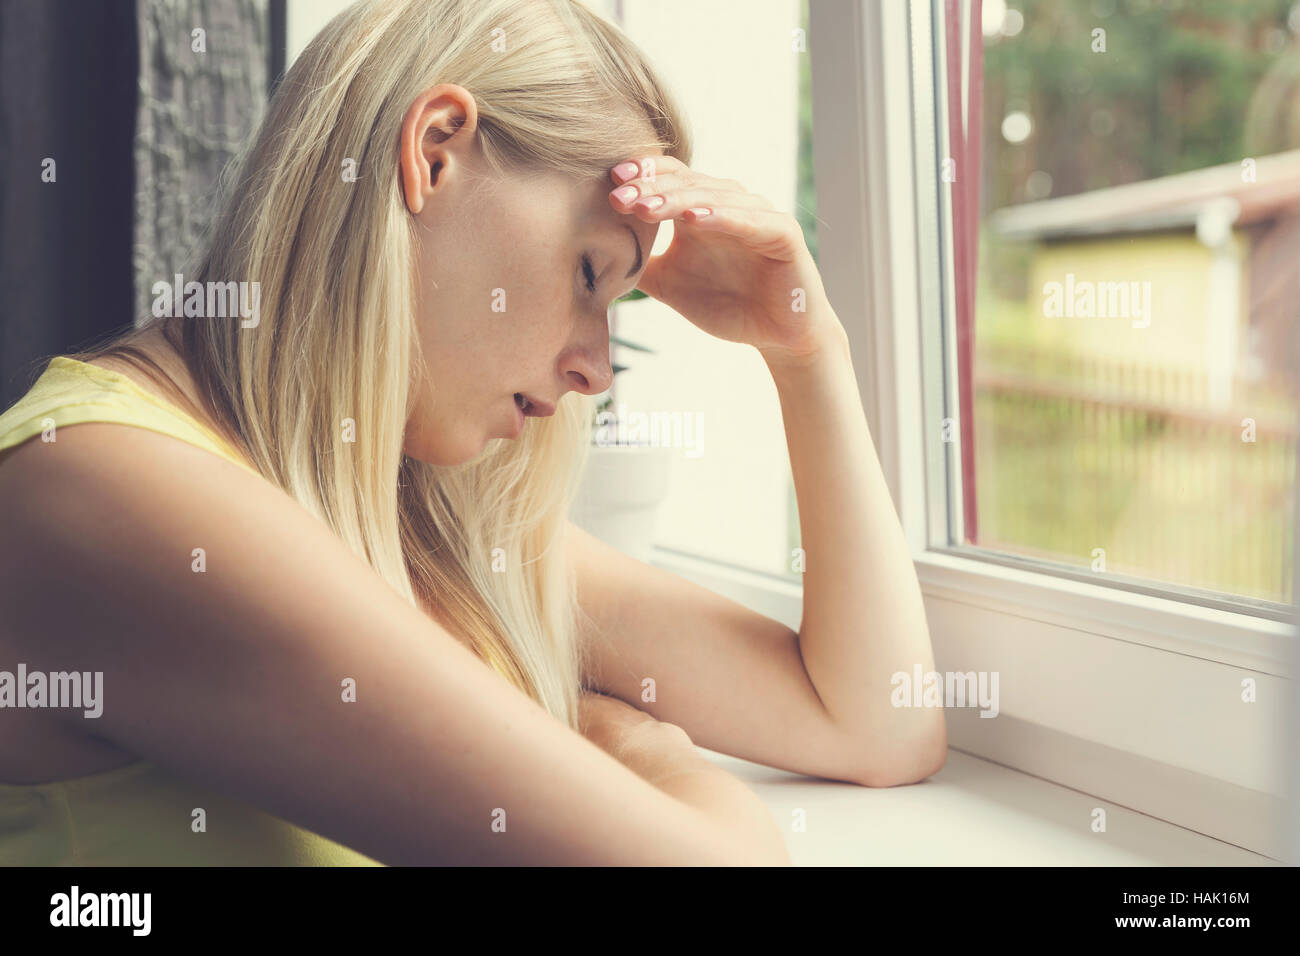 tired, depressed woman sitting by the window Stock Photo